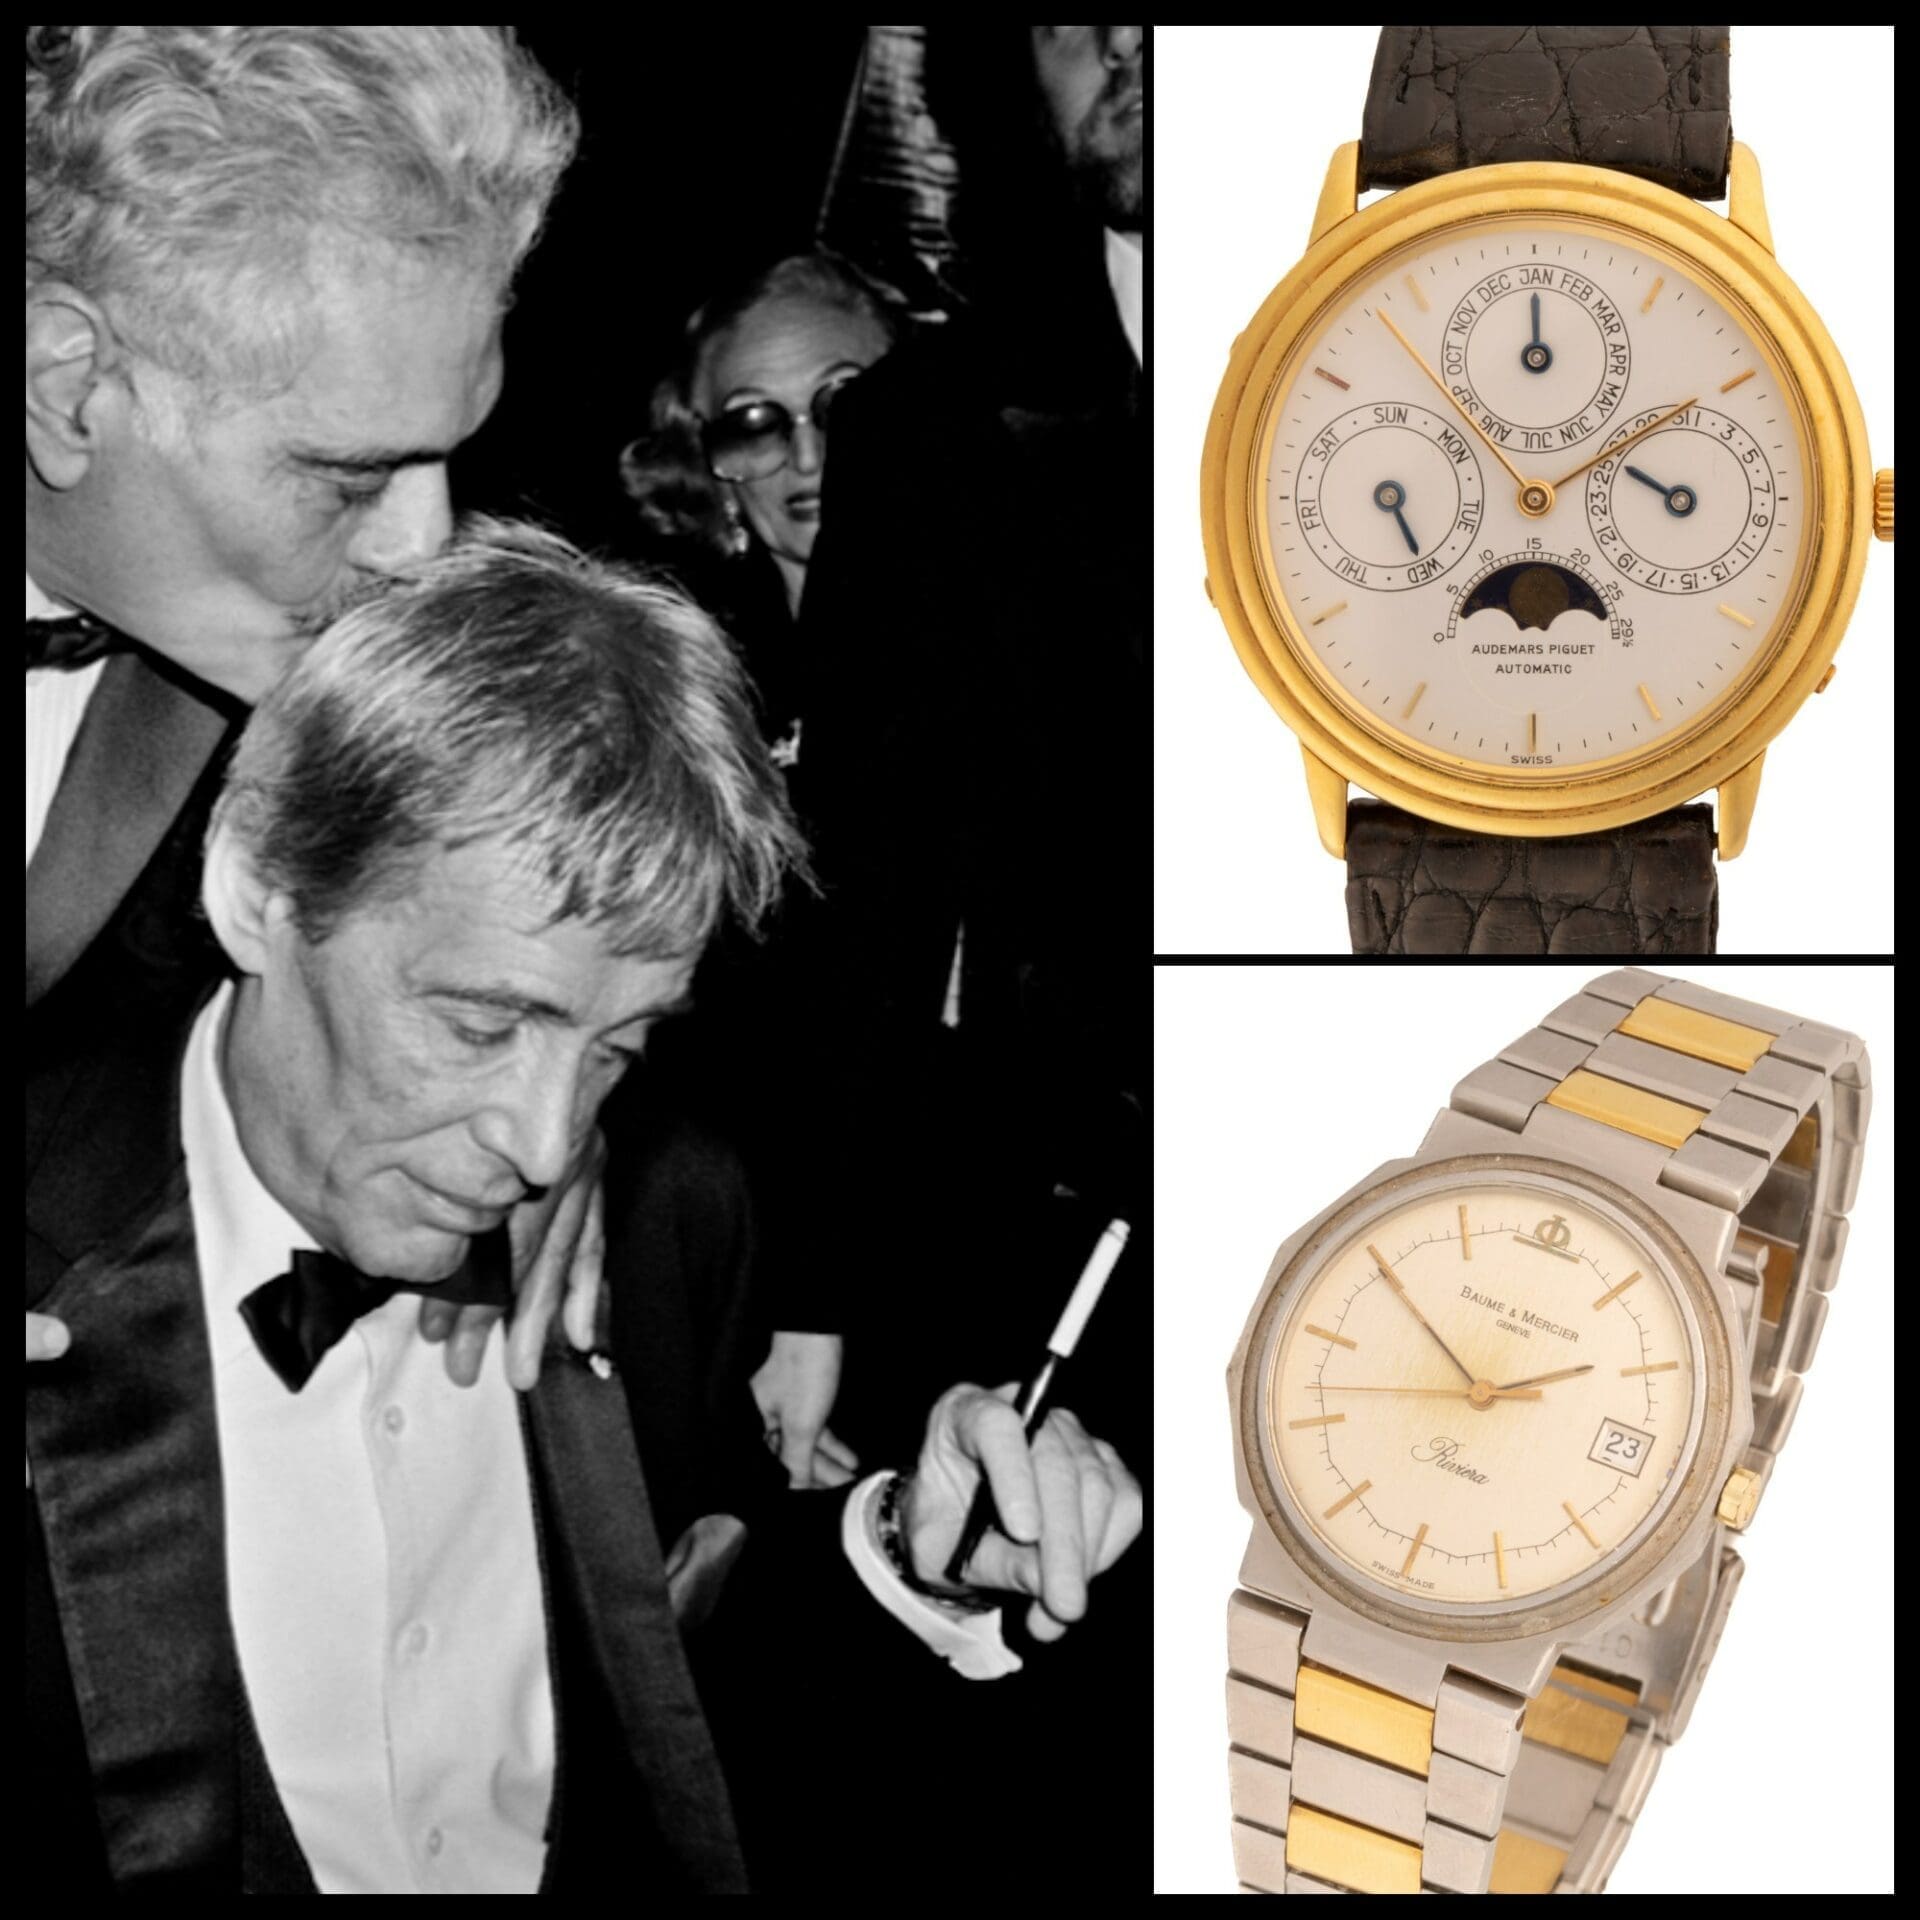 The crazy drinking stories about Peter O’Toole that’ll make you want to buy his watches